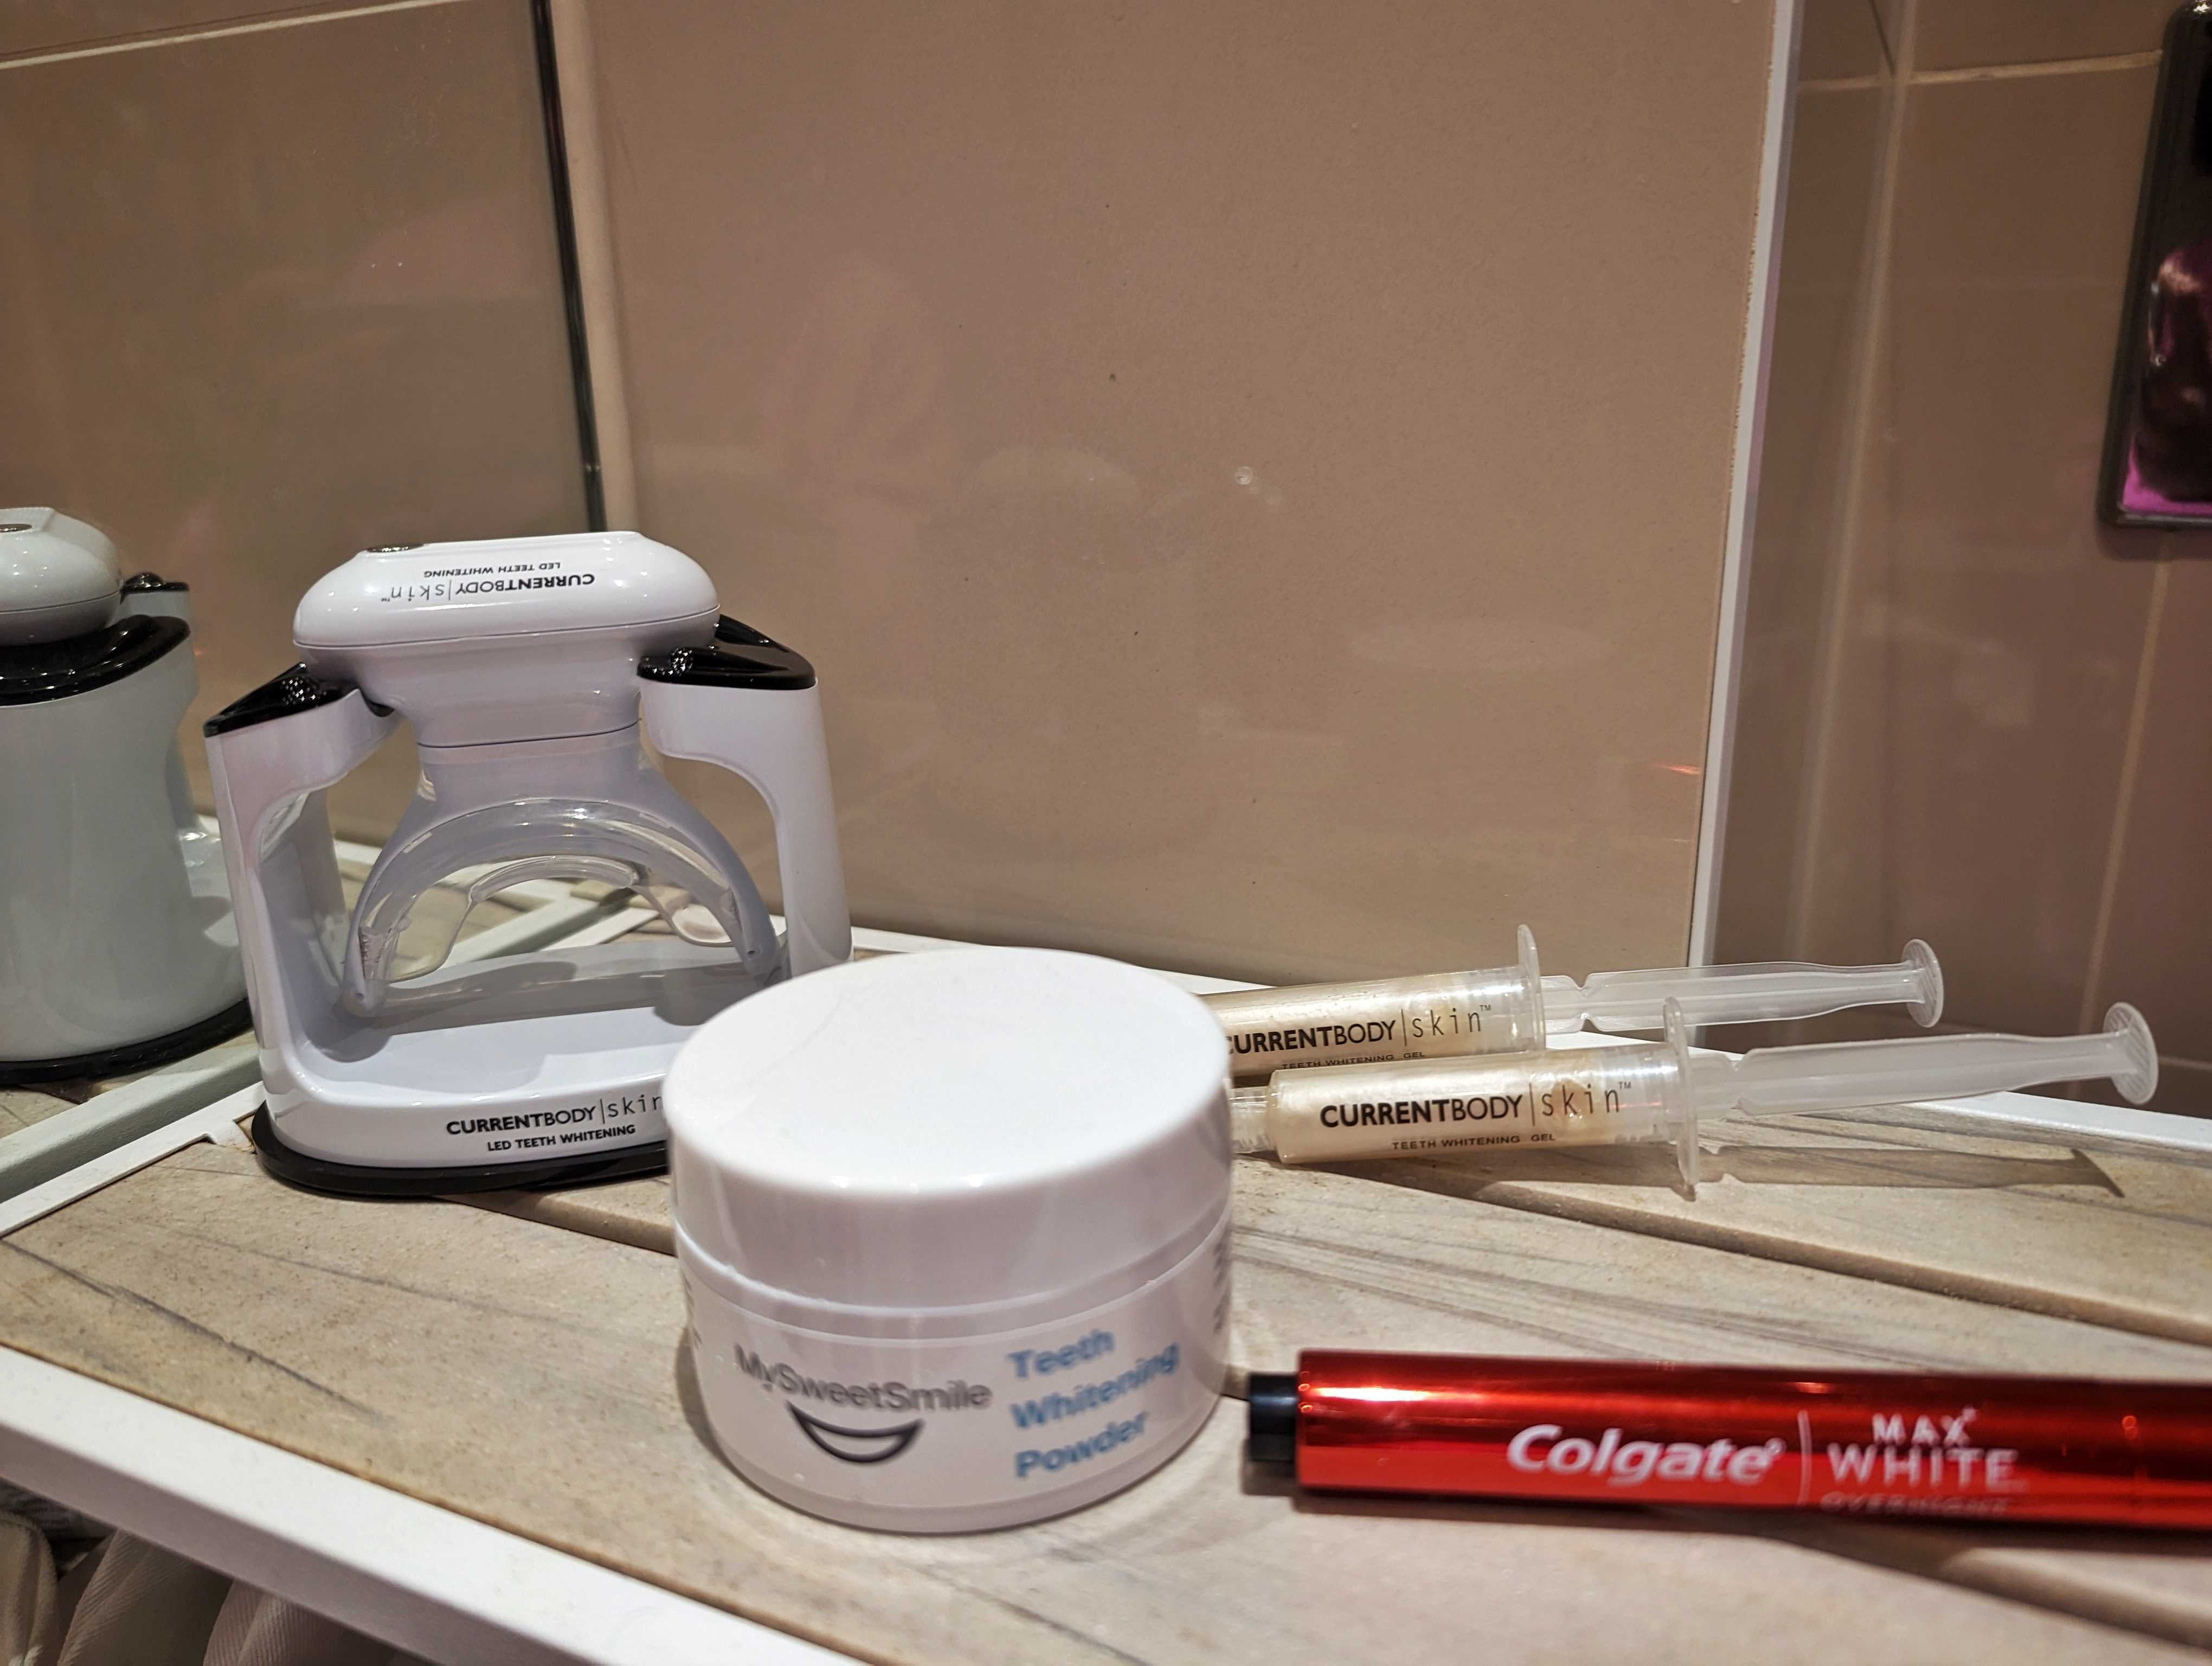 We tried a range of teeth whitening treatments, from pens to powders and more